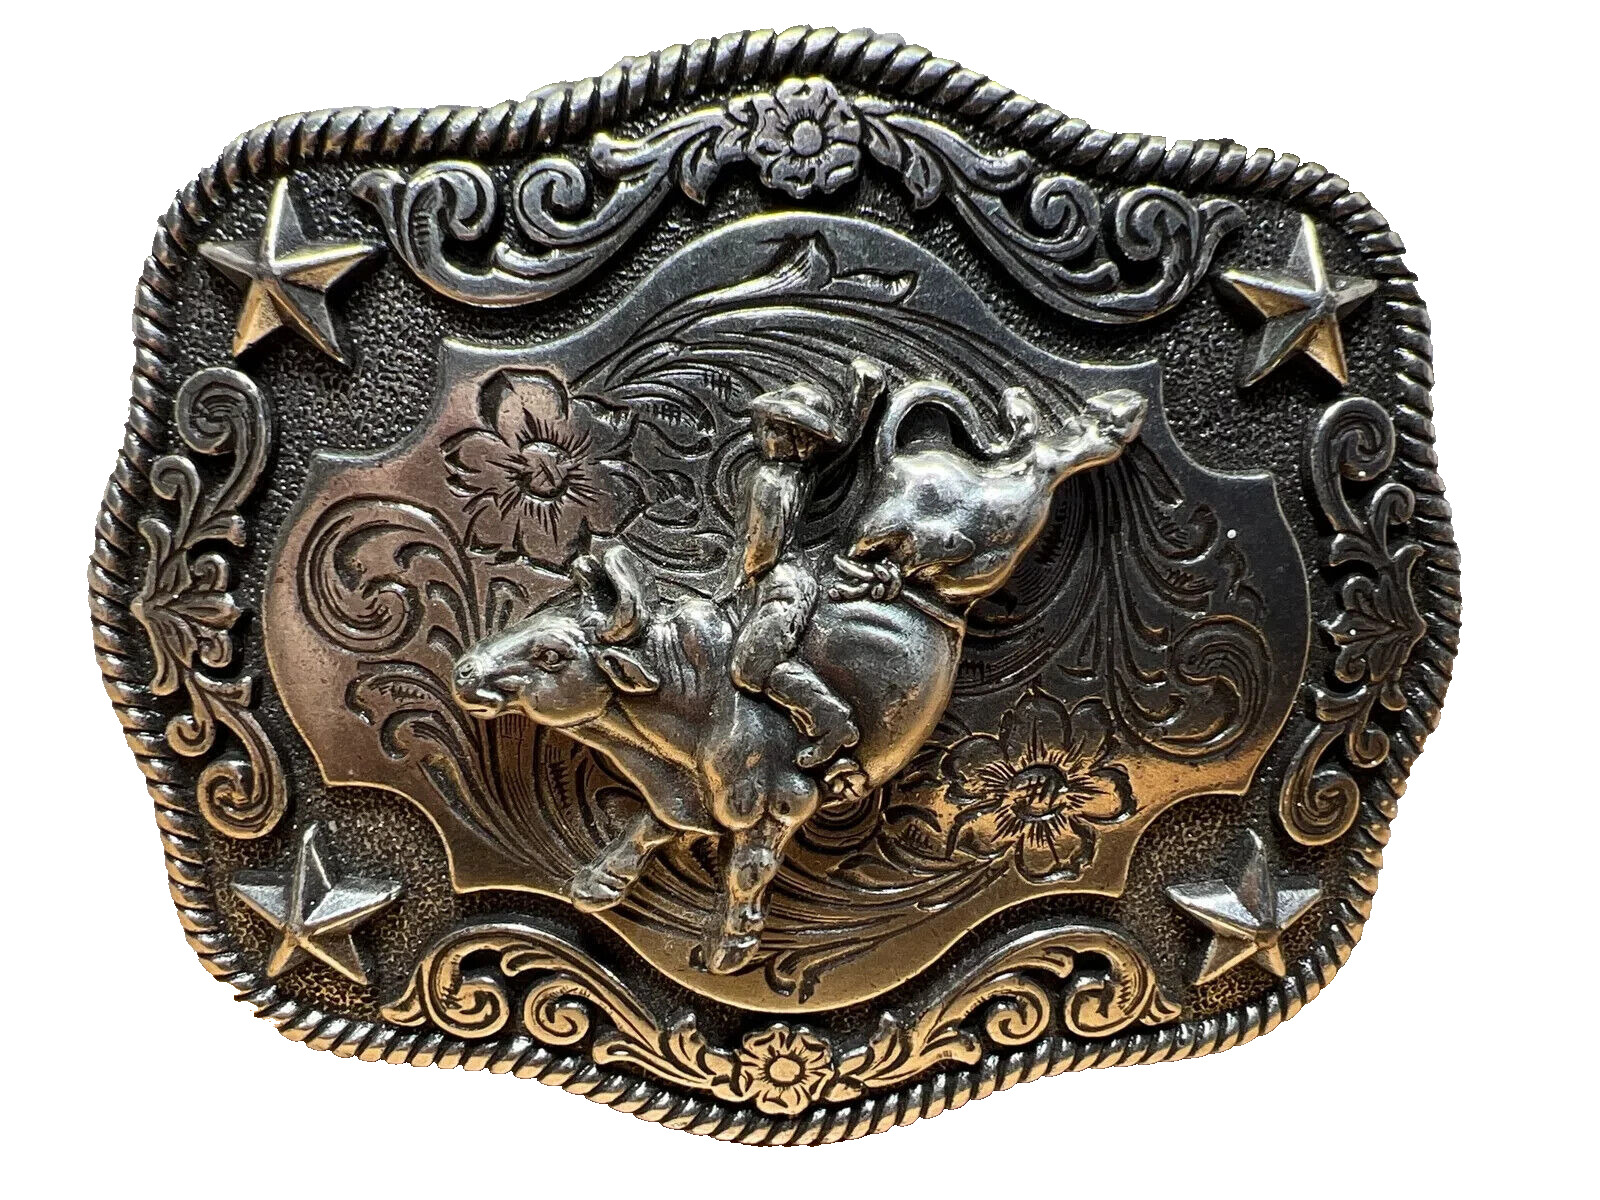 Bull Rider Belt Buckle Vintage Rodeo Cowboy Country Western Wear Nocona NFR TIME